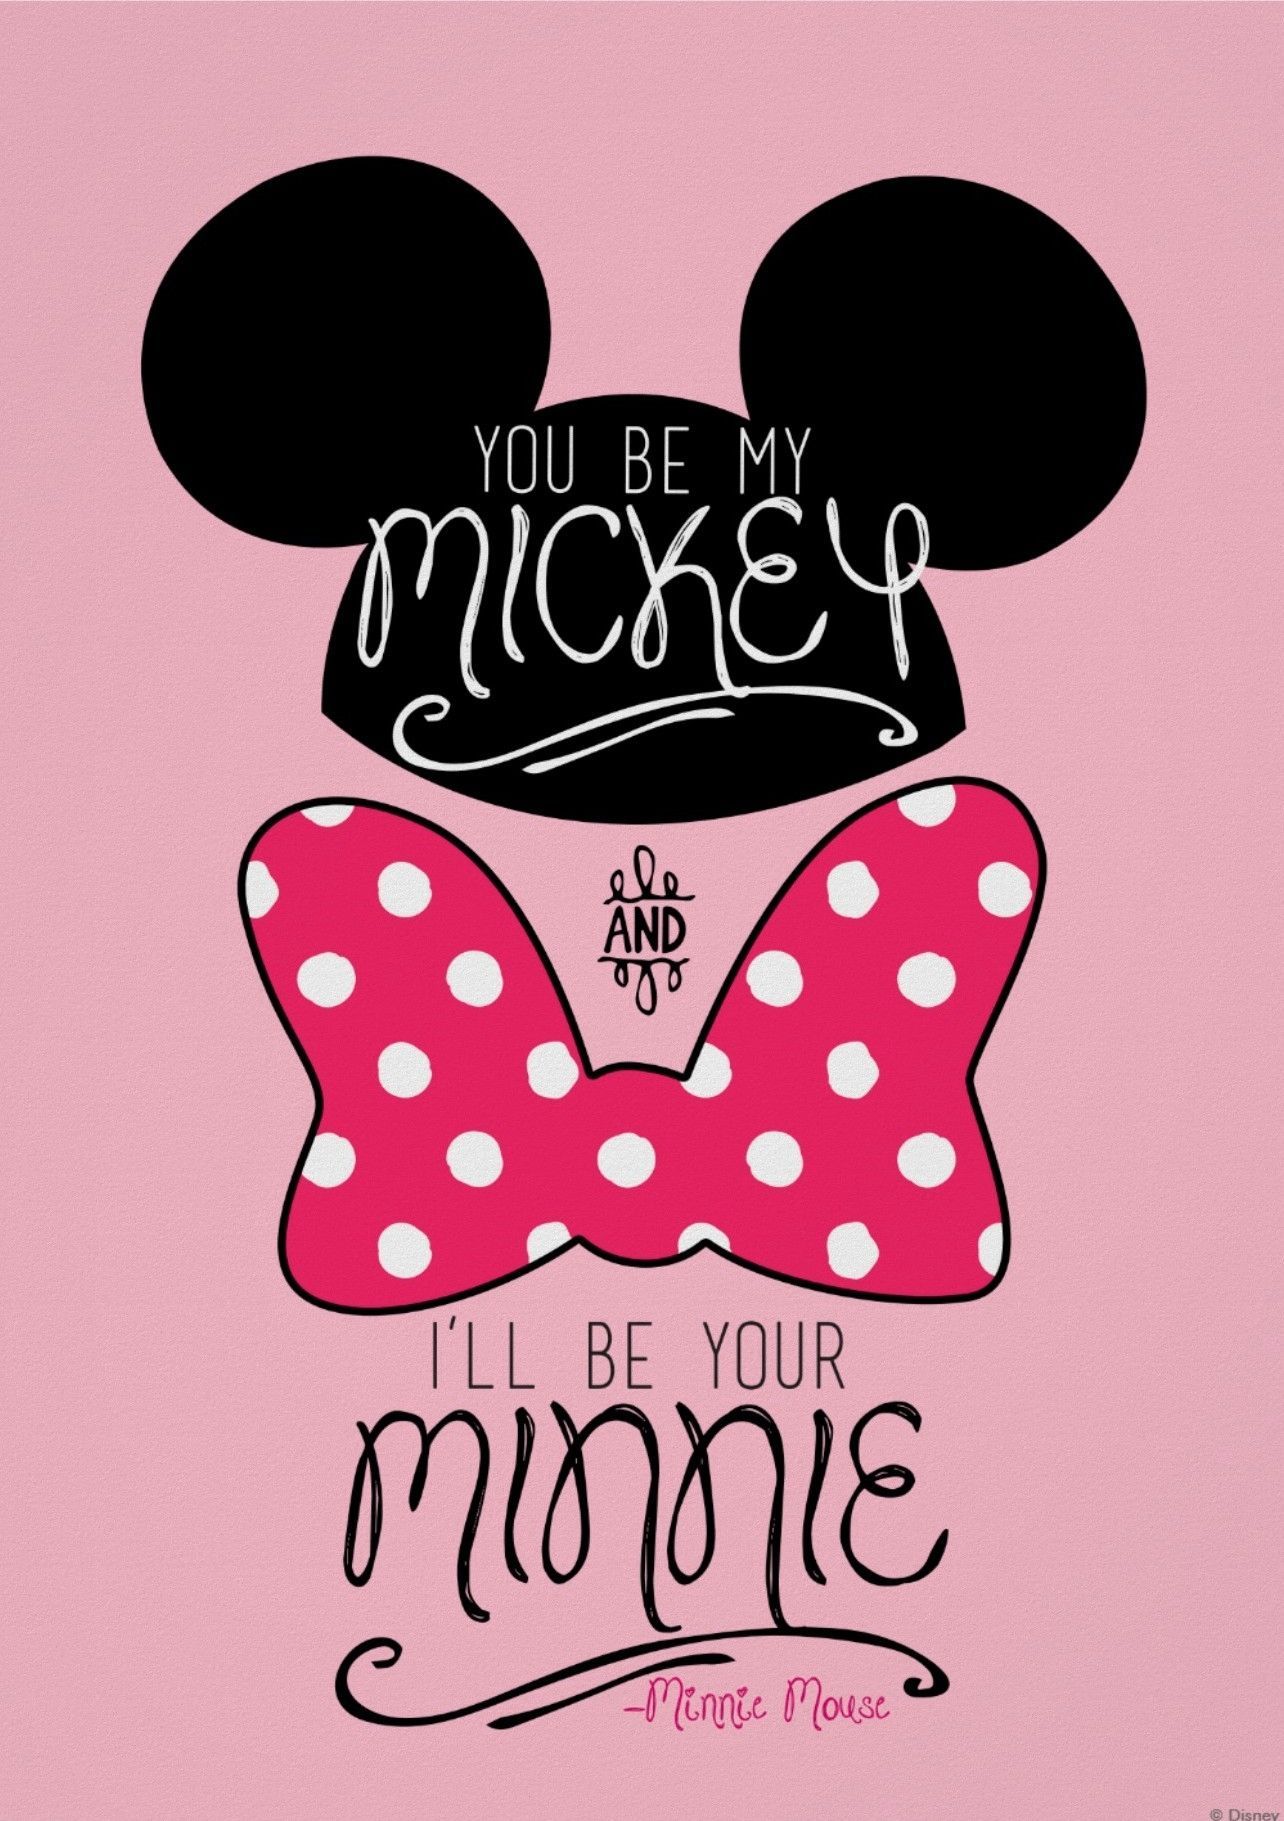 Mickey and Minnie Mouse Wallpaper